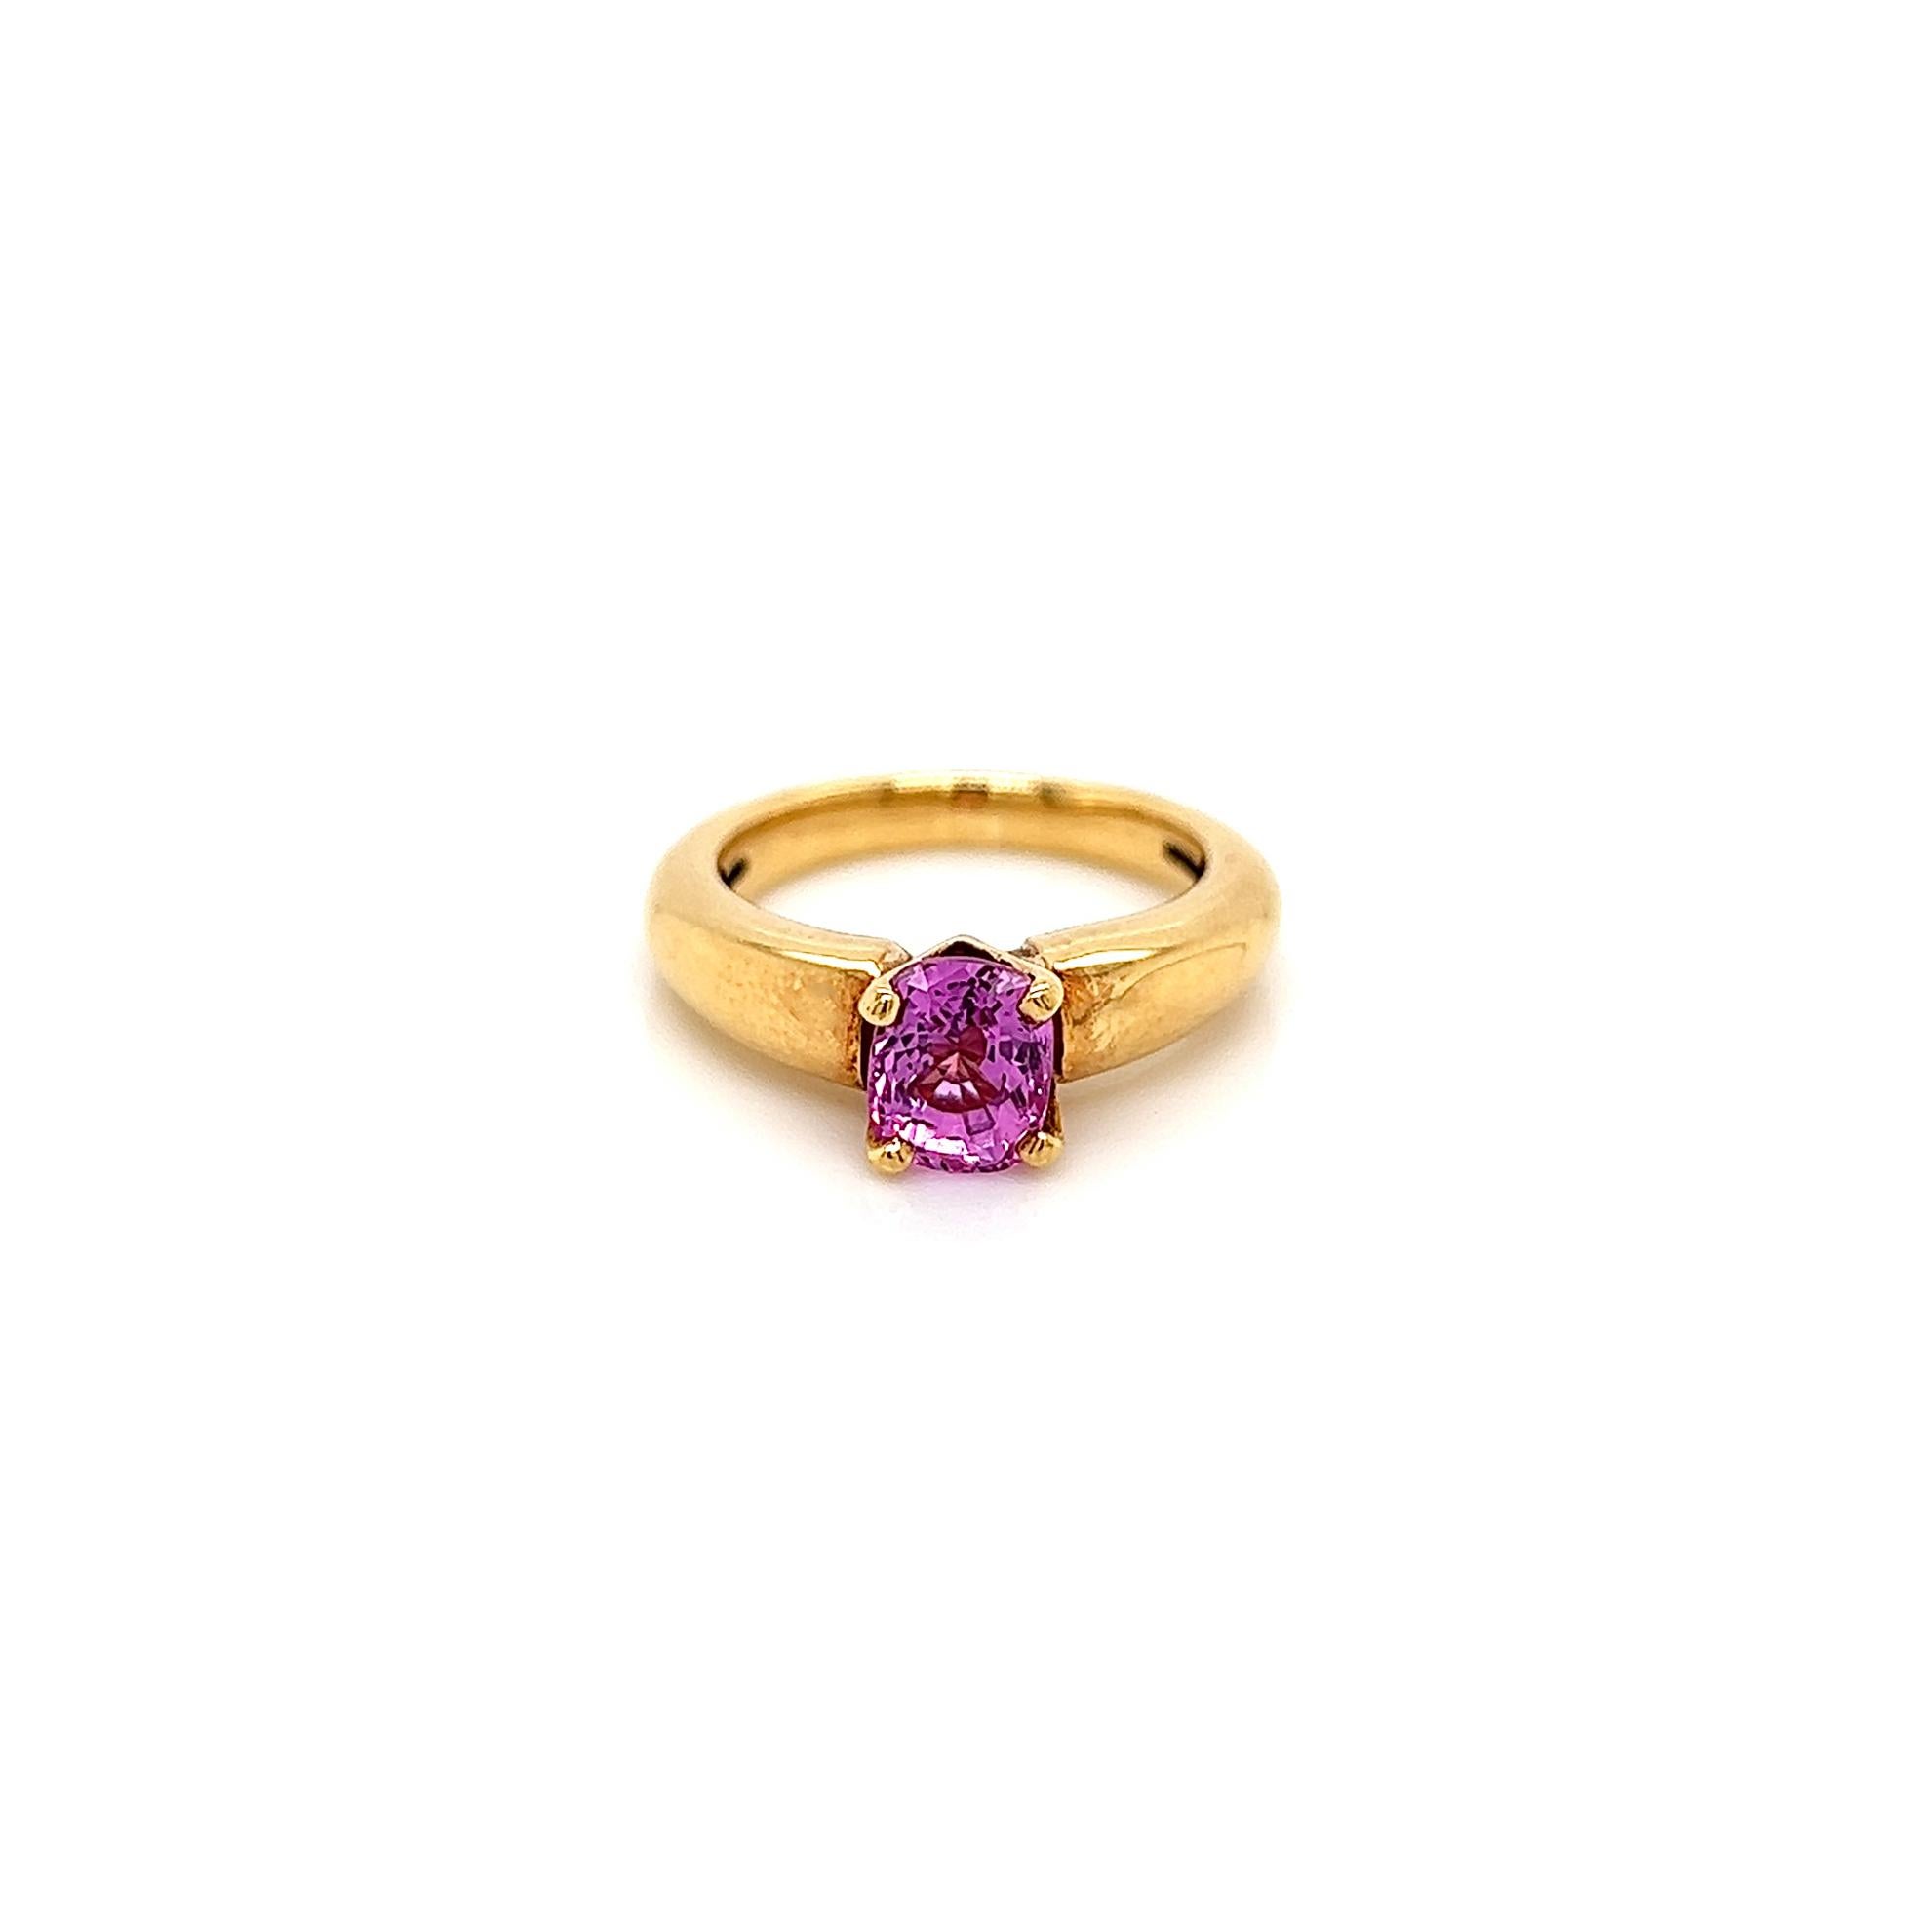 1.90 Carat Pink Sapphire Solitaire Ladies Ring in Yellow Gold Band

-Metal Type: 18K Yellow Gold 
-1.90 Carat Cushion Cut Pink Sapphire 
-Size 5.5

Made in New York City. Band size is adjustable for an additional fee.